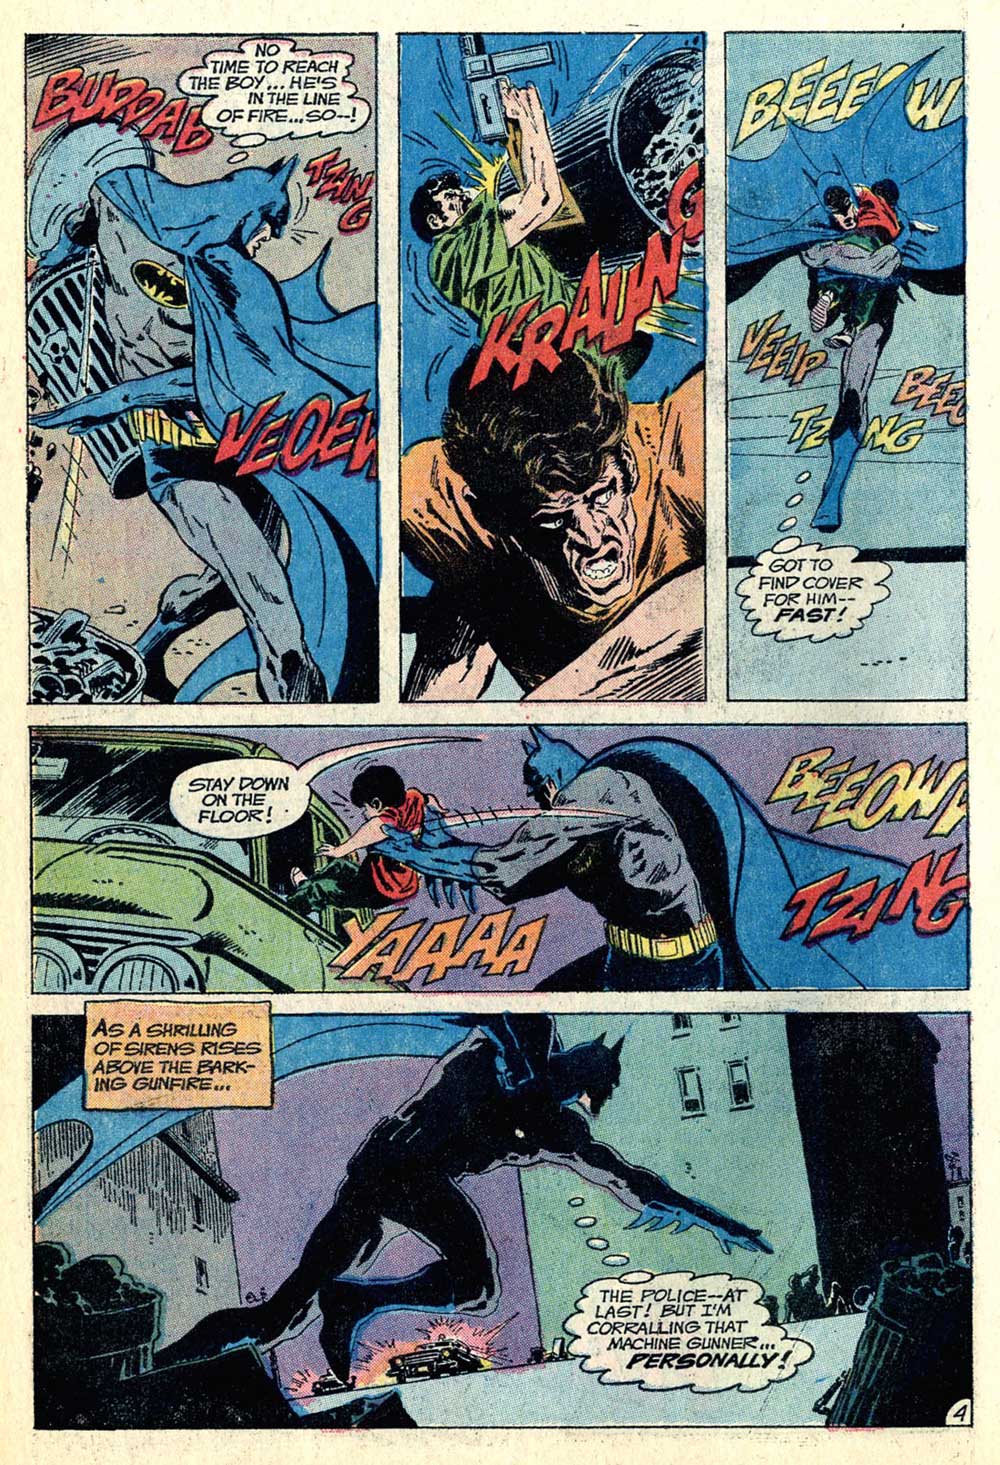 THE BRAVE AND THE BOLD #105 written by Bob Haney with art by Jim Aparo